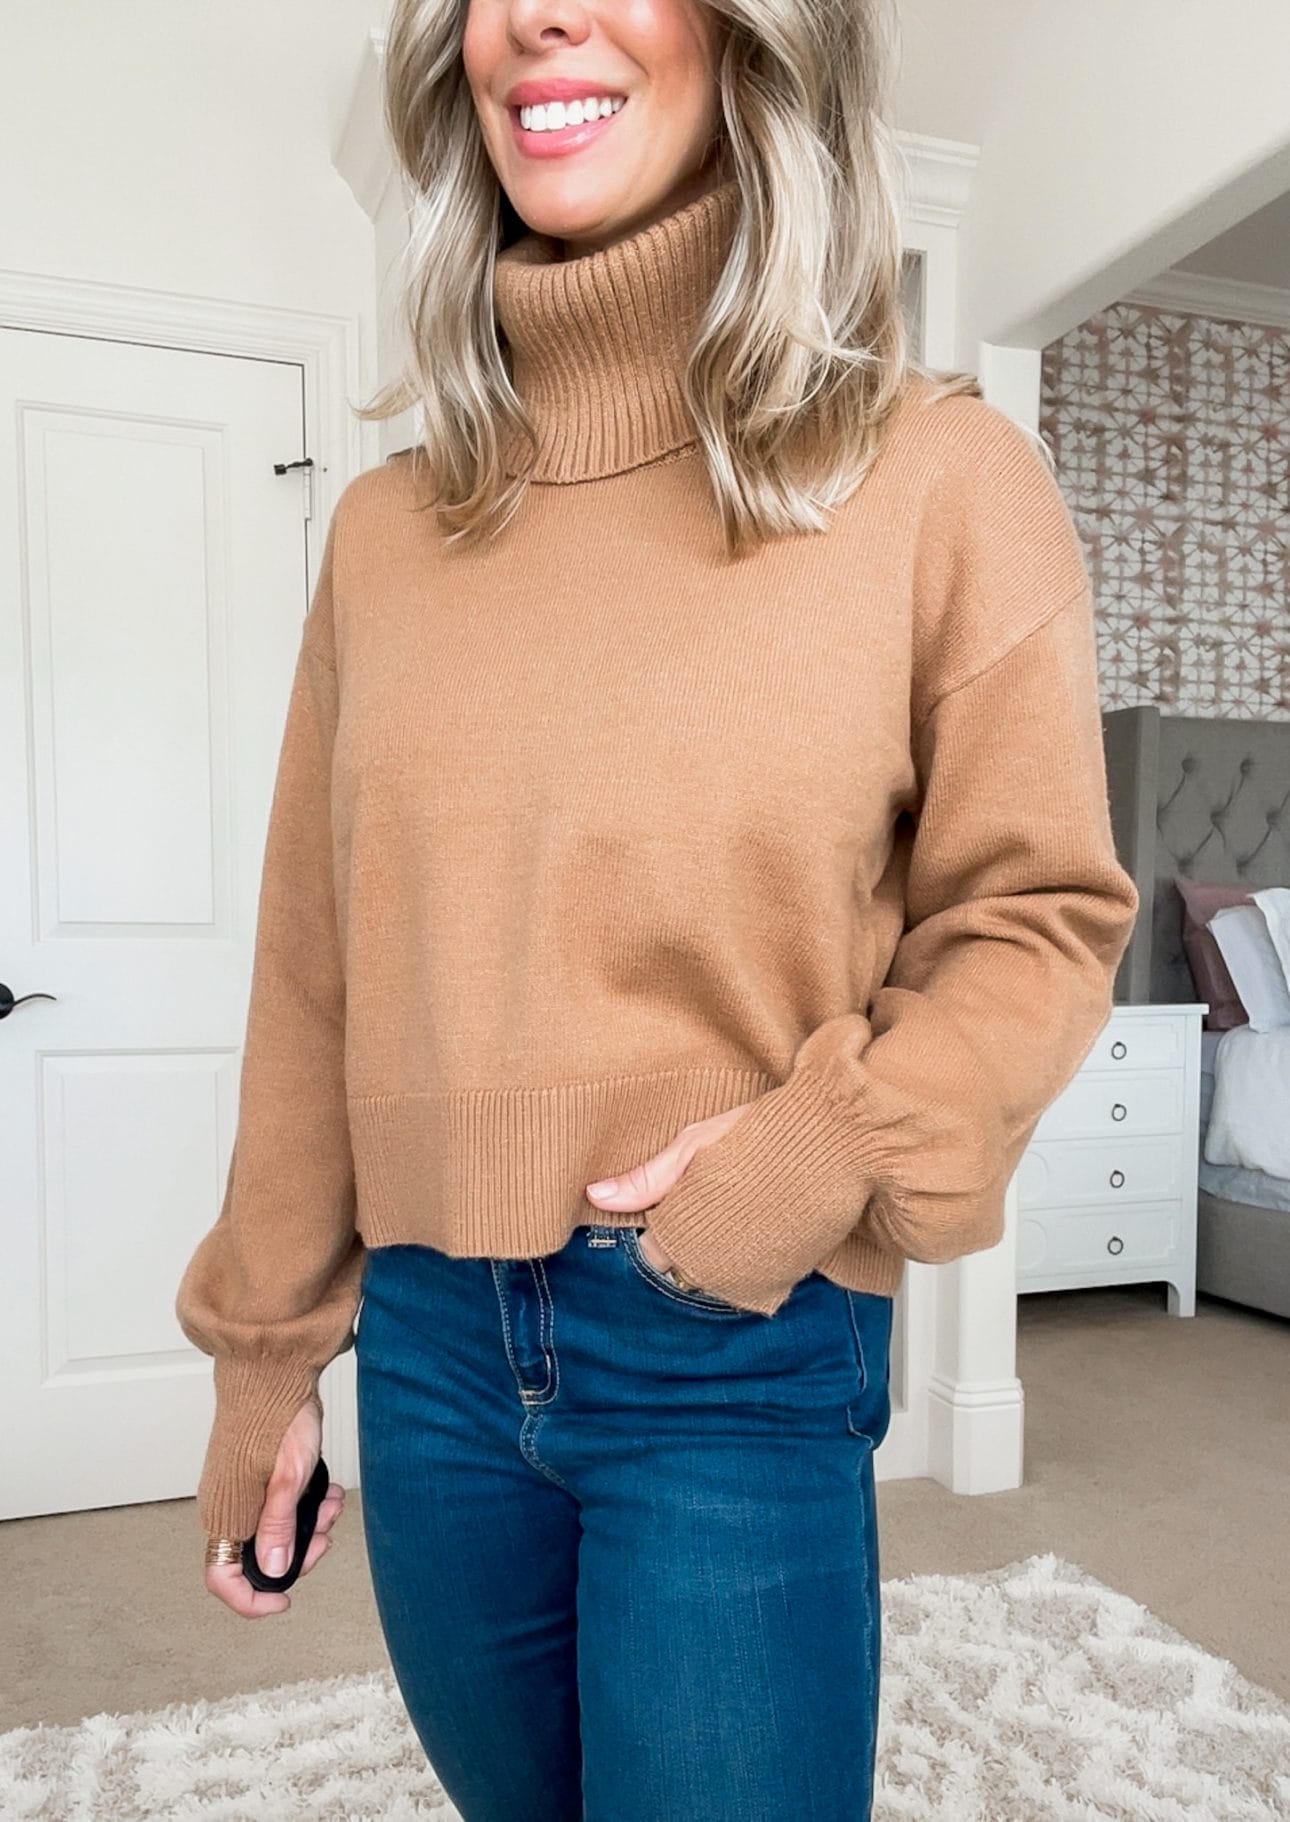 Amazon Fashion Finds, Turtleneck Sweater, Jeans, Mules 